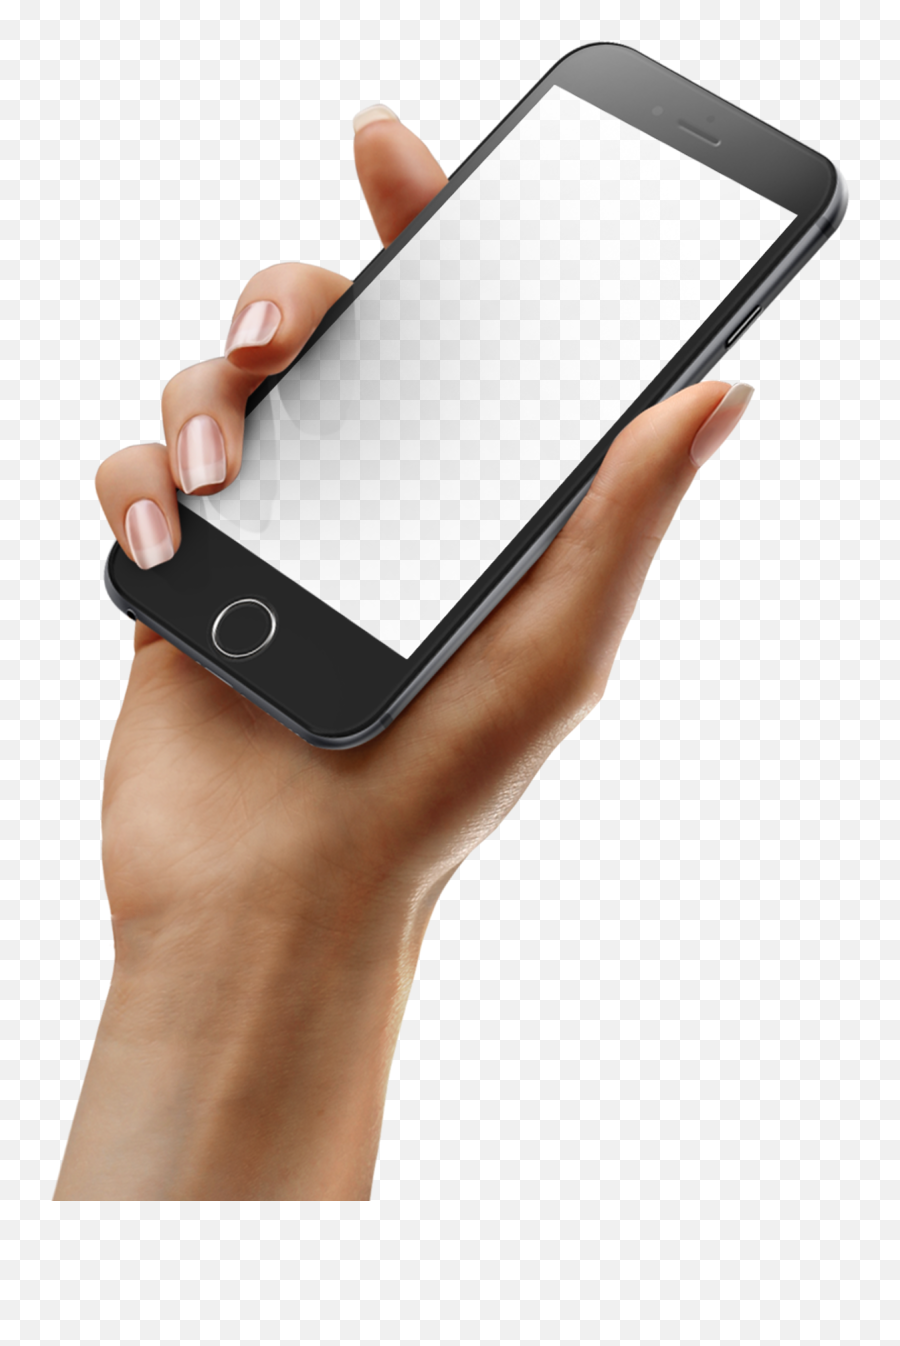 Iphone In Hand Png Image Free Download Searchpngcom - Mockup Iphone Hand Png,Hand Holding Iphone Png